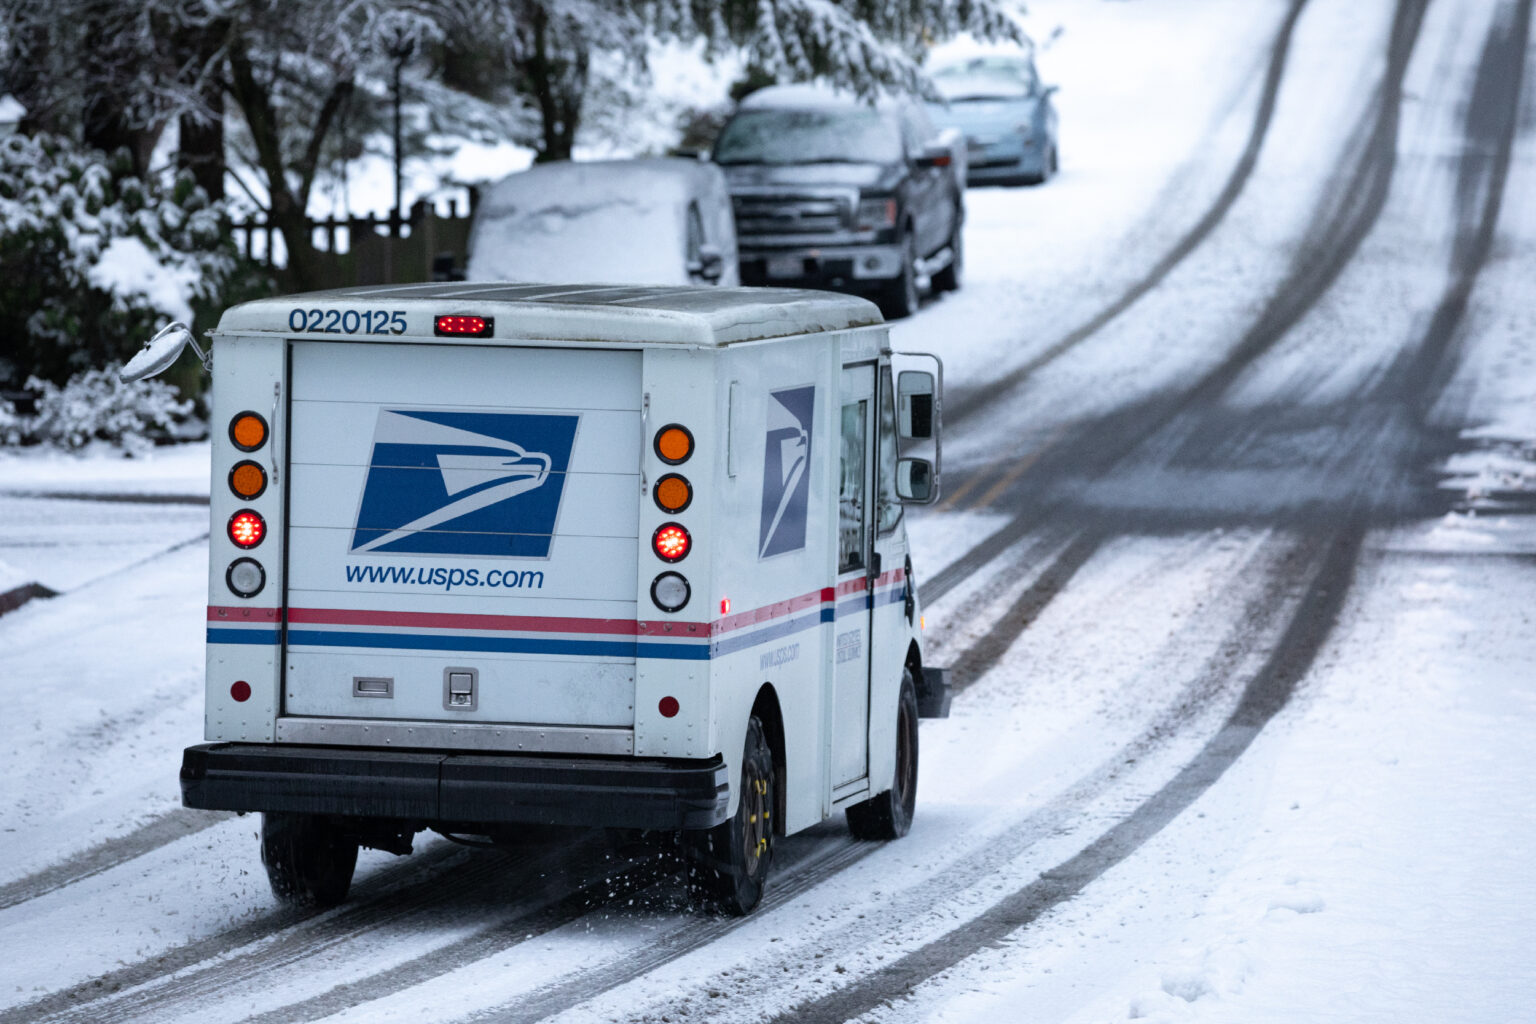 USPS say they are ready for the 2022 festive season ChannelX